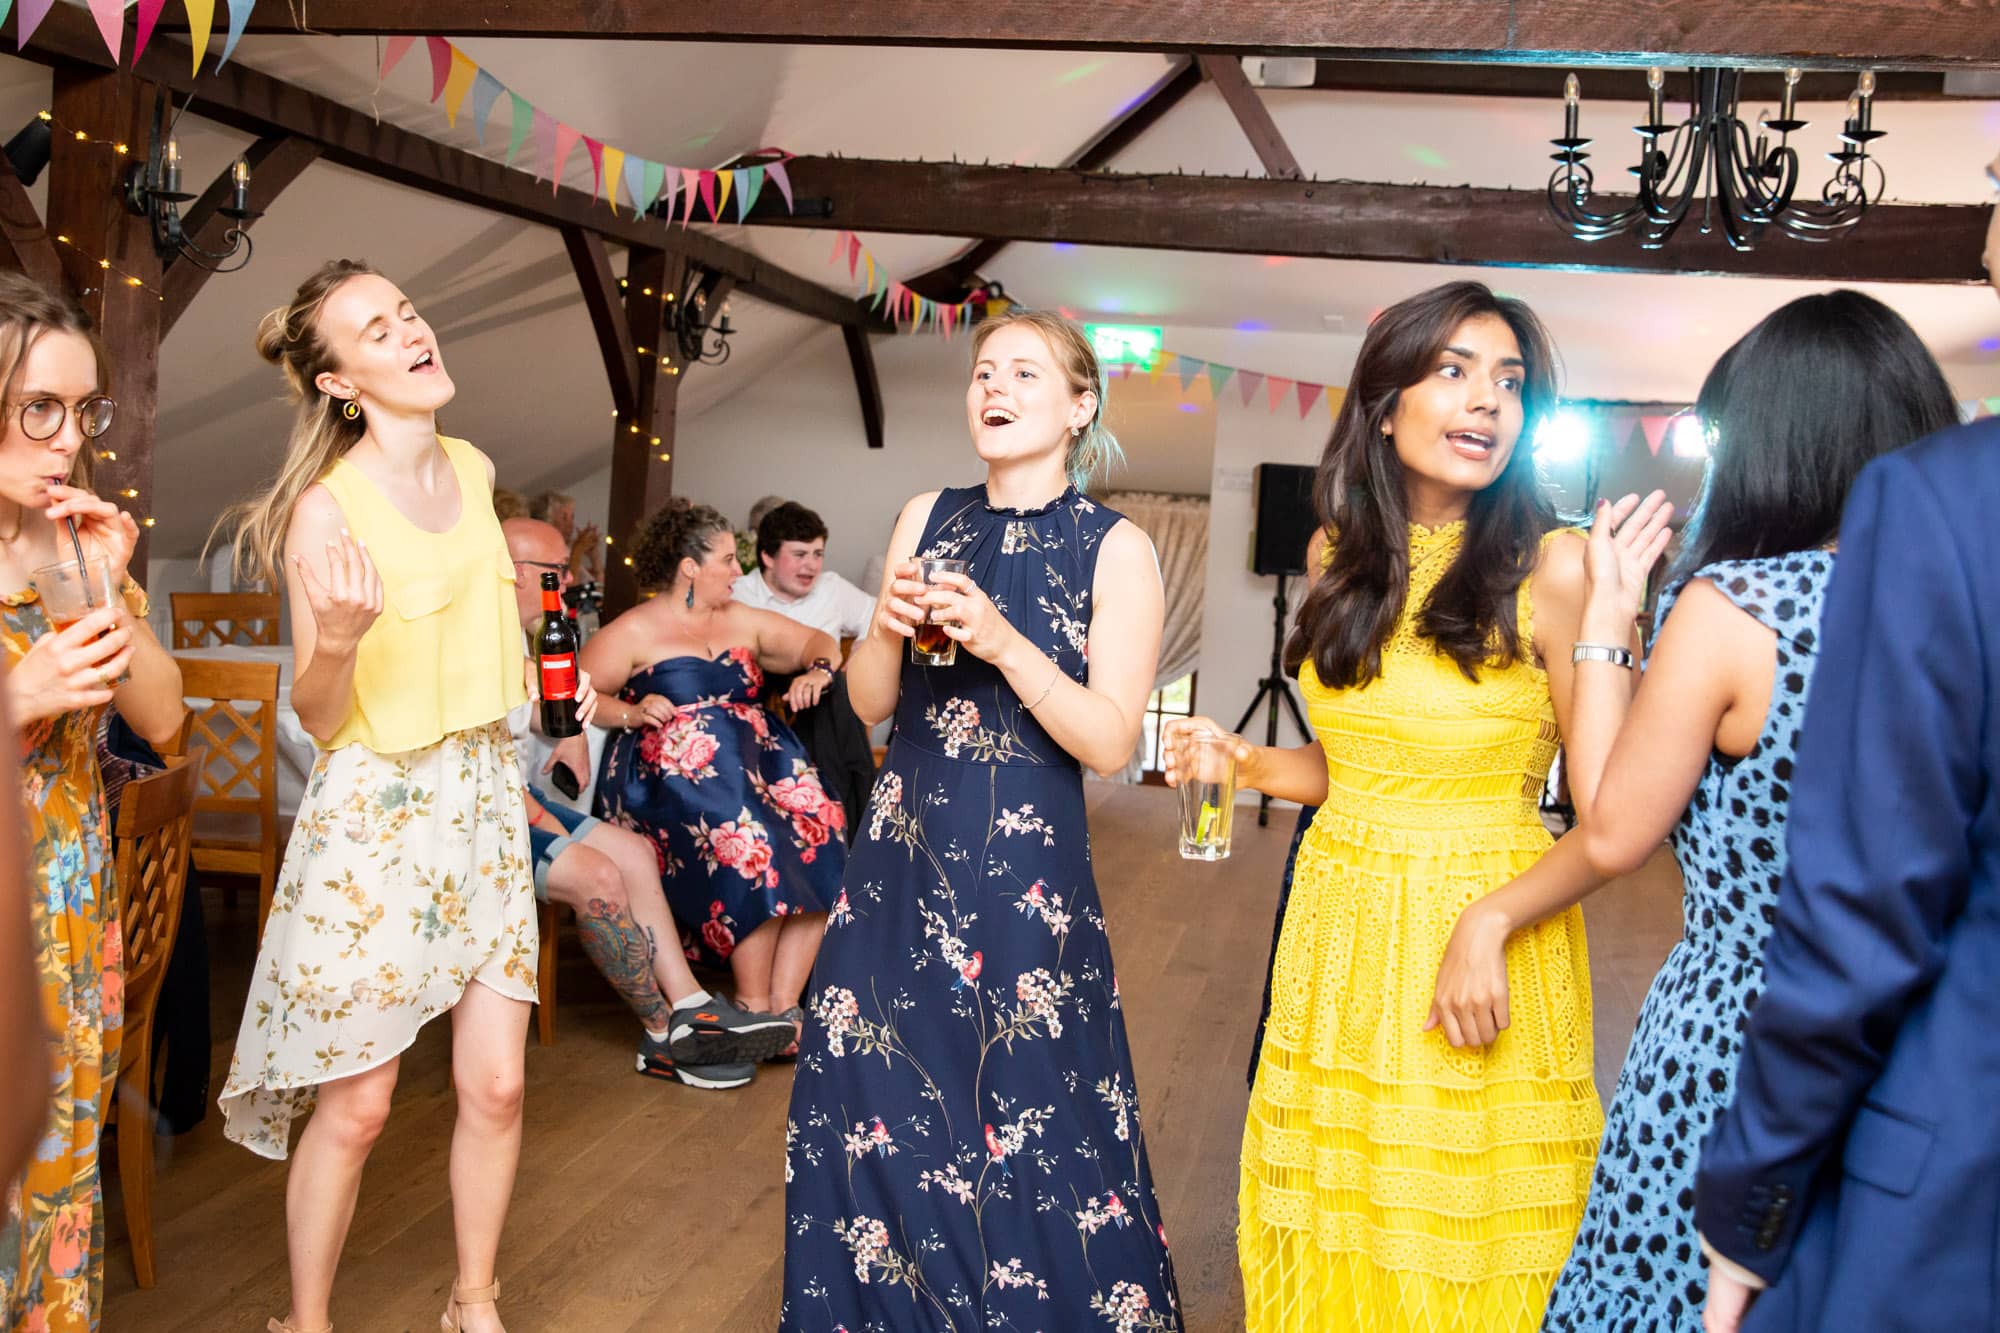 Guests dancing at wedding reception on dancefloor and singing in wedding photoshoot by Bromley photographer